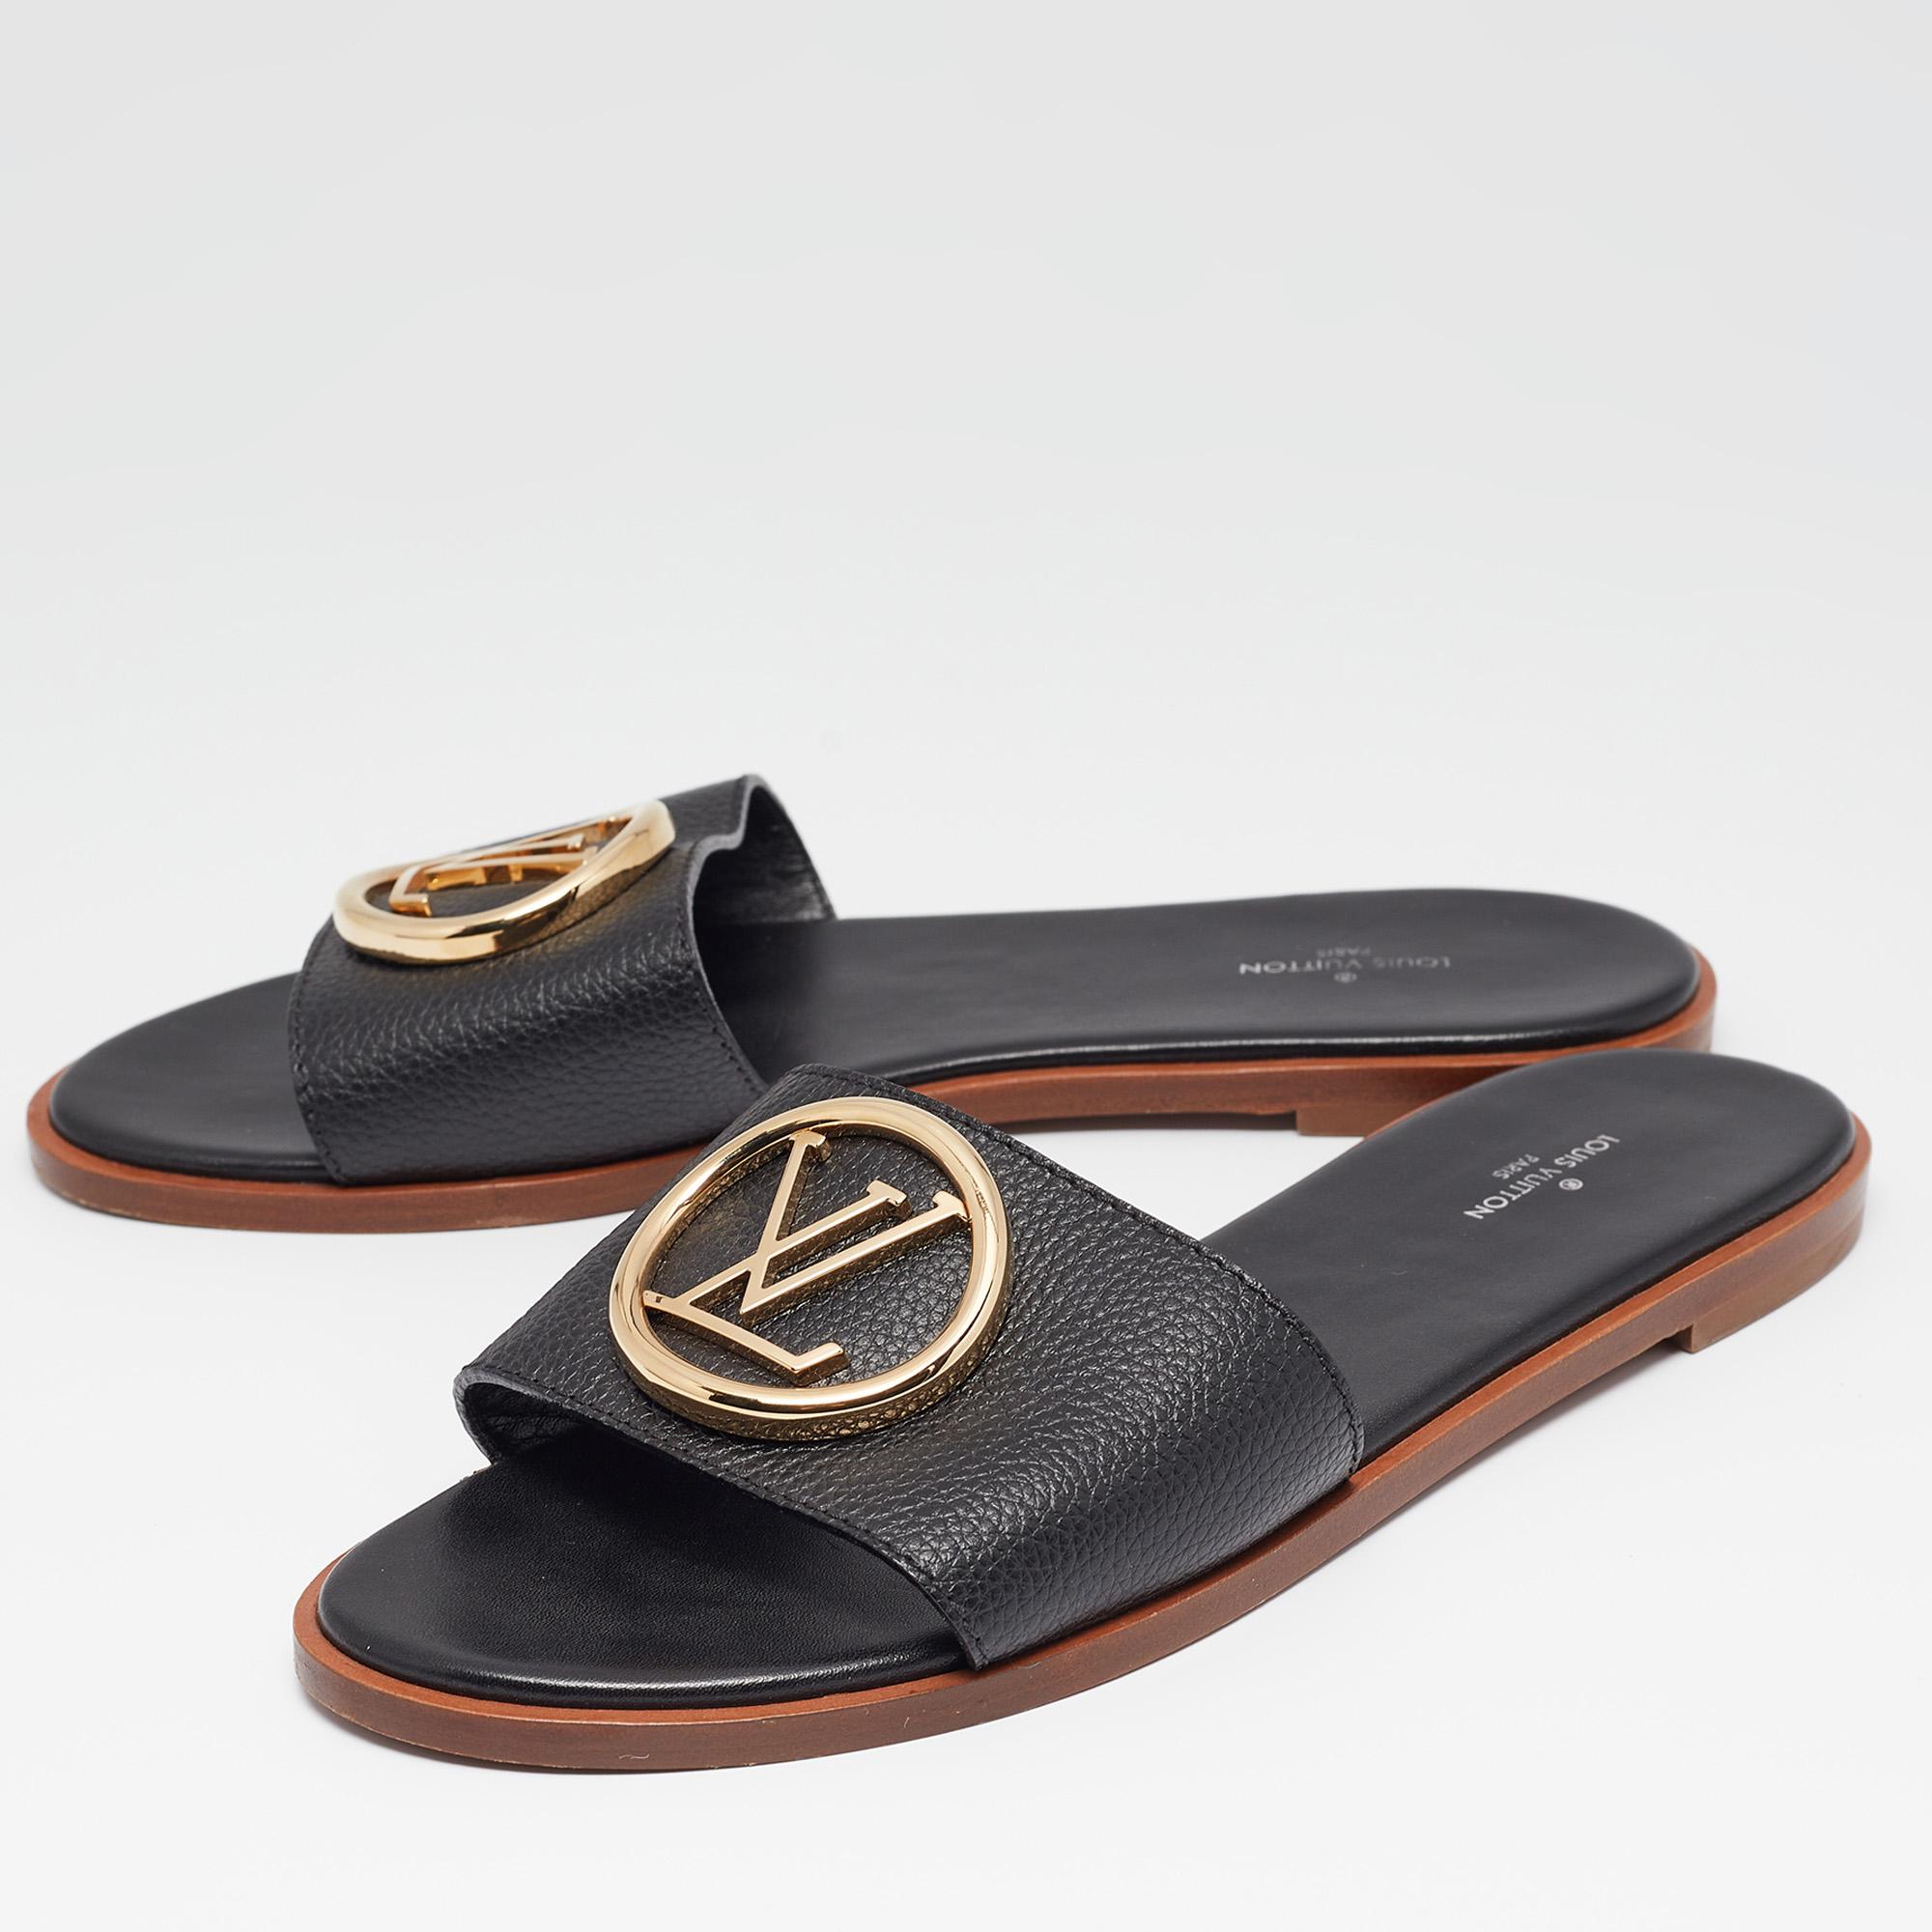 Enhance your casual looks with a touch of high style with these Louis Vuitton slides. Rendered in quality material with a lovely hue adorning its expanse, this pair is a must-have!

